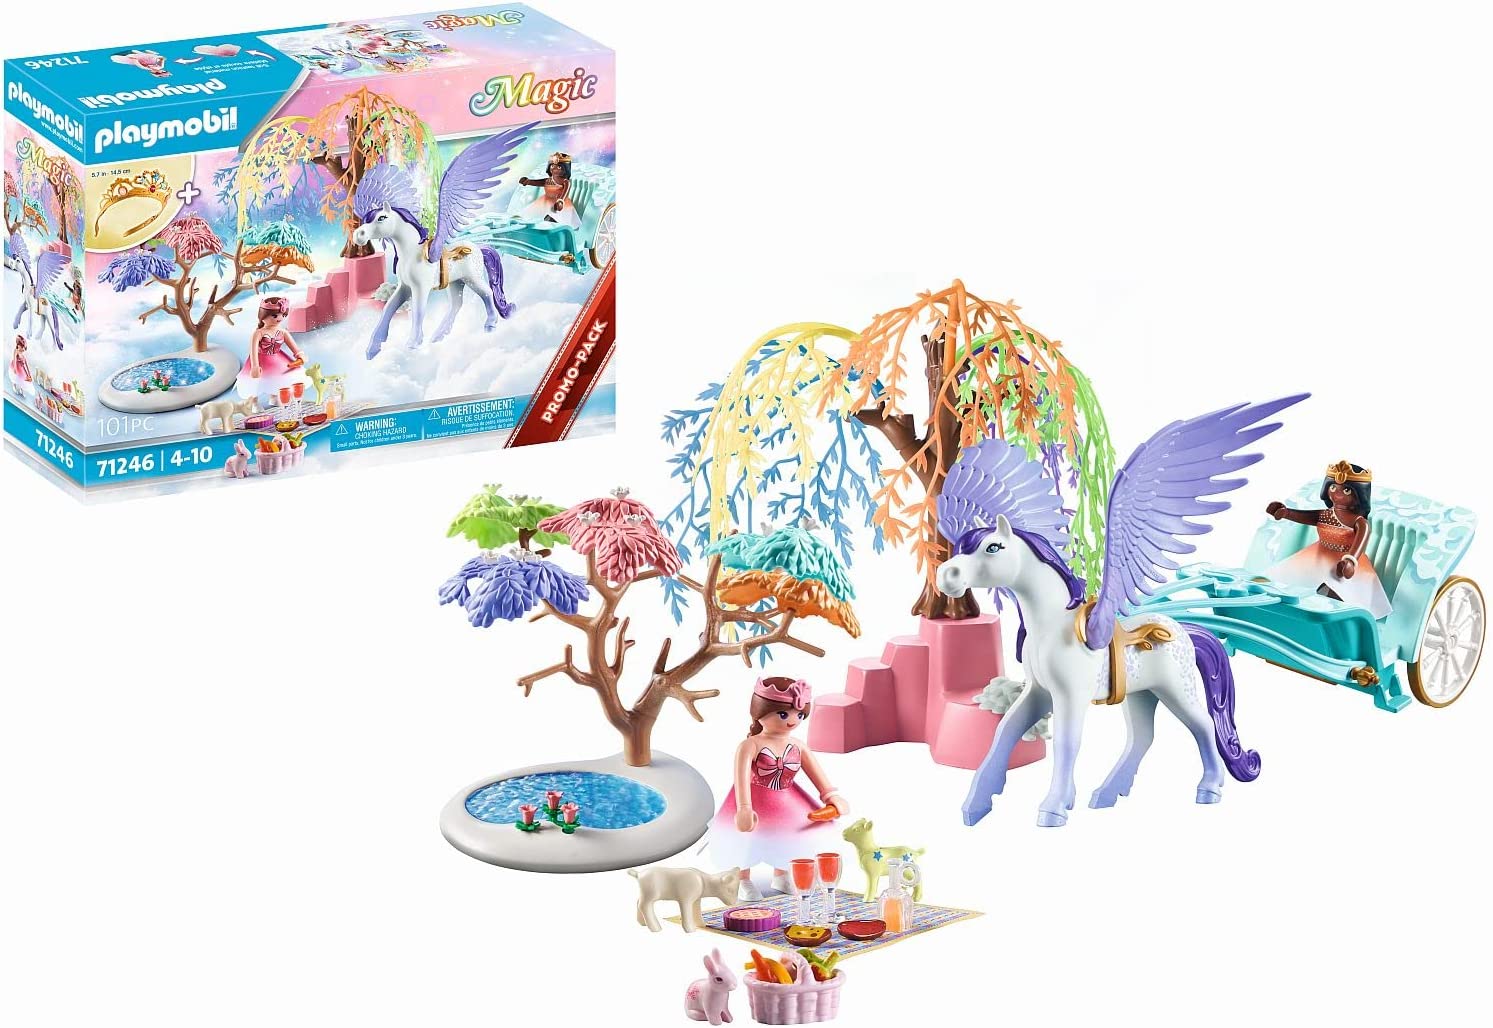 Playmobil Magic 71246 Picnic with Pegasus Carriage with Large Children \ 's tiara toy for children from 4 years